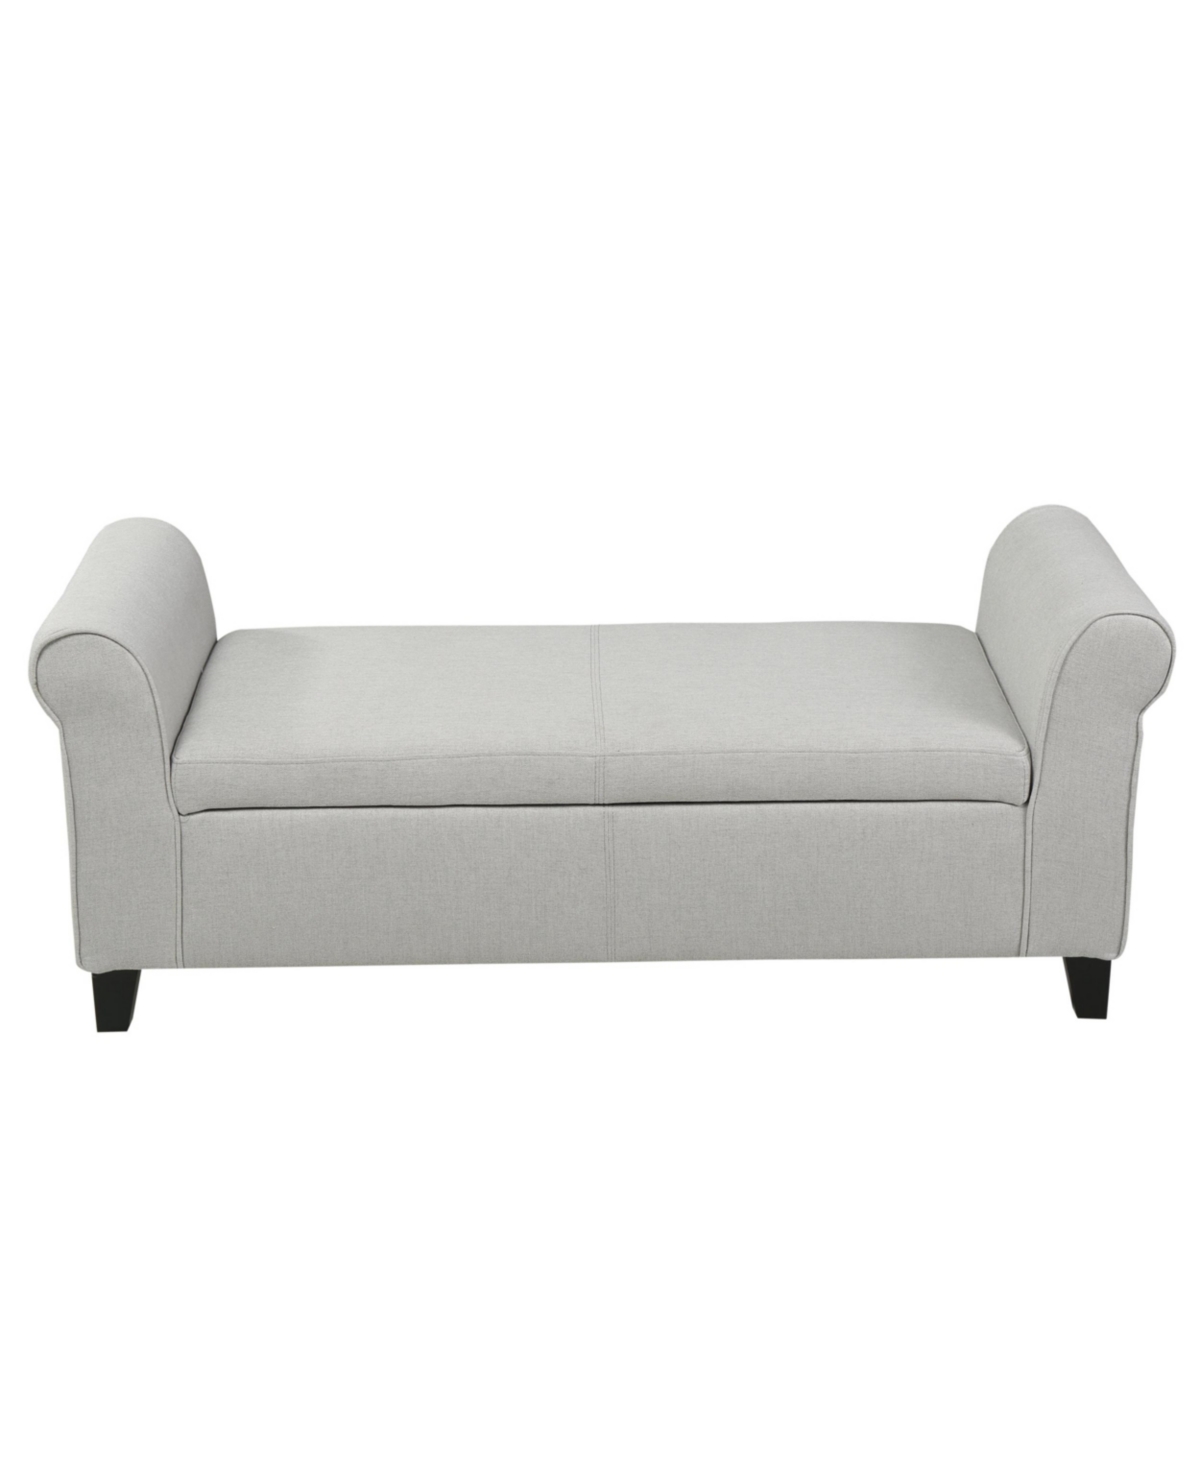 Noble House Hayes Contemporary Upholstered Storage Ottoman Bench With Rolled Arms In Light Gray